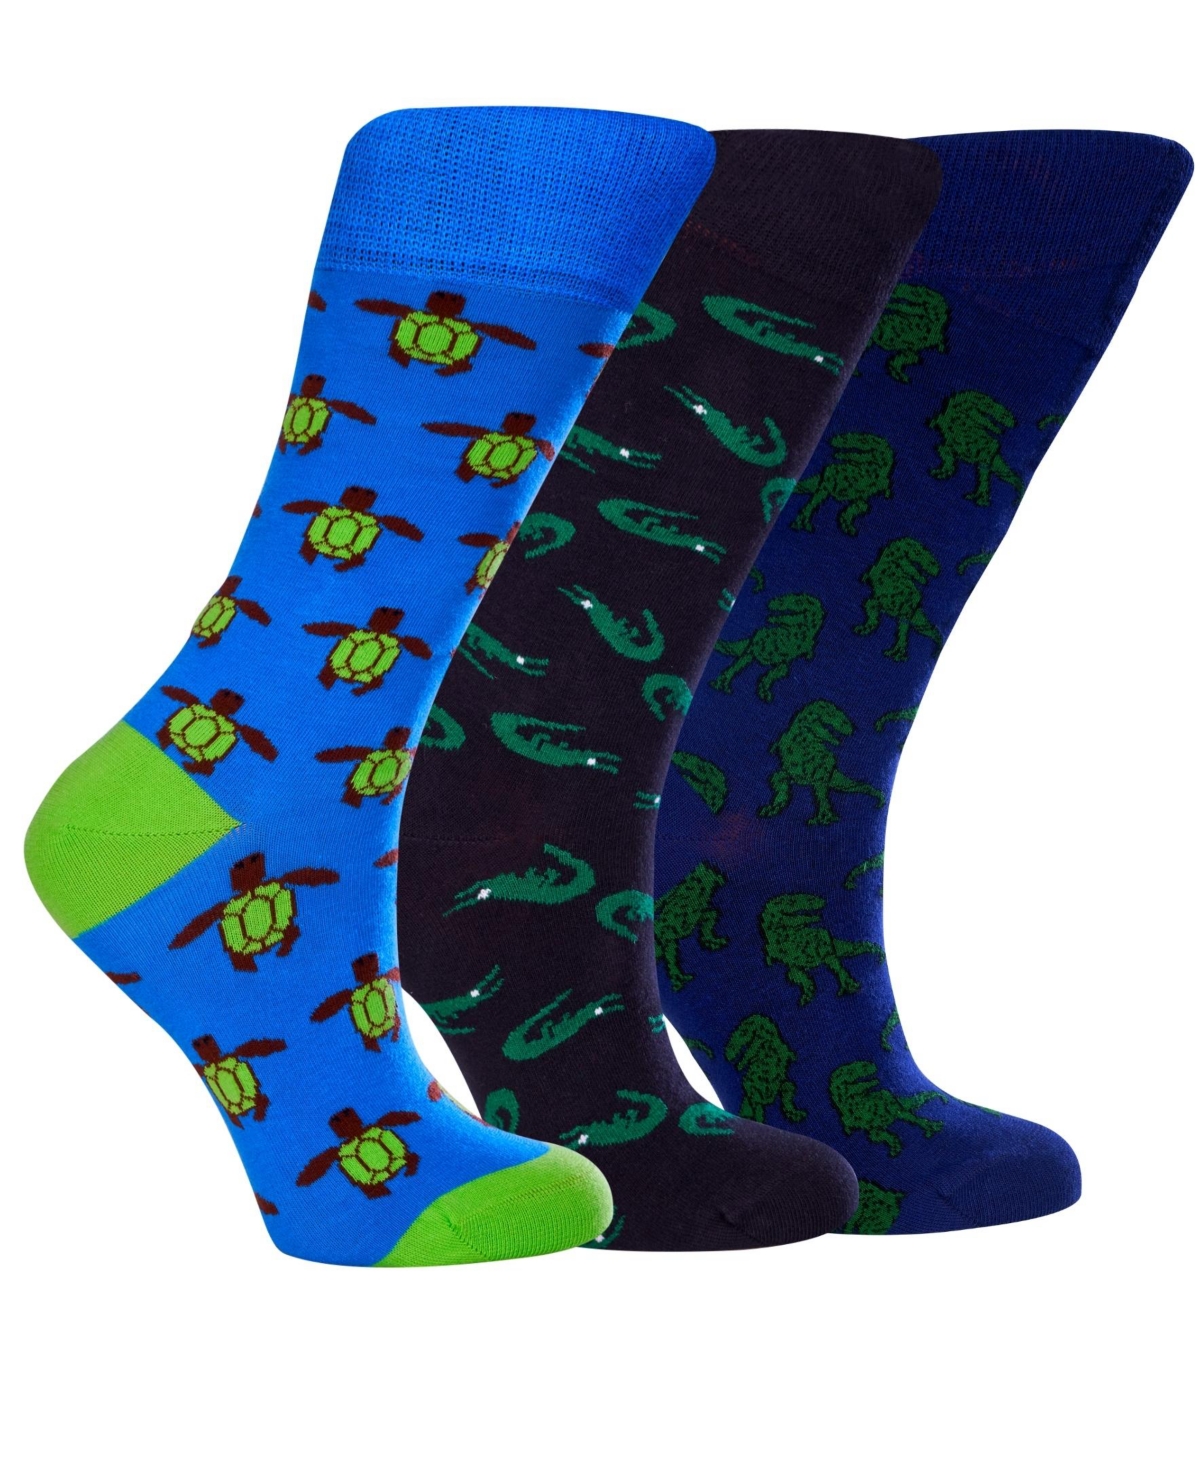 Women's Ancient Bundle W-Cotton Novelty Crew Socks with Seamless Toe Design, Pack of 3 - Multi Color